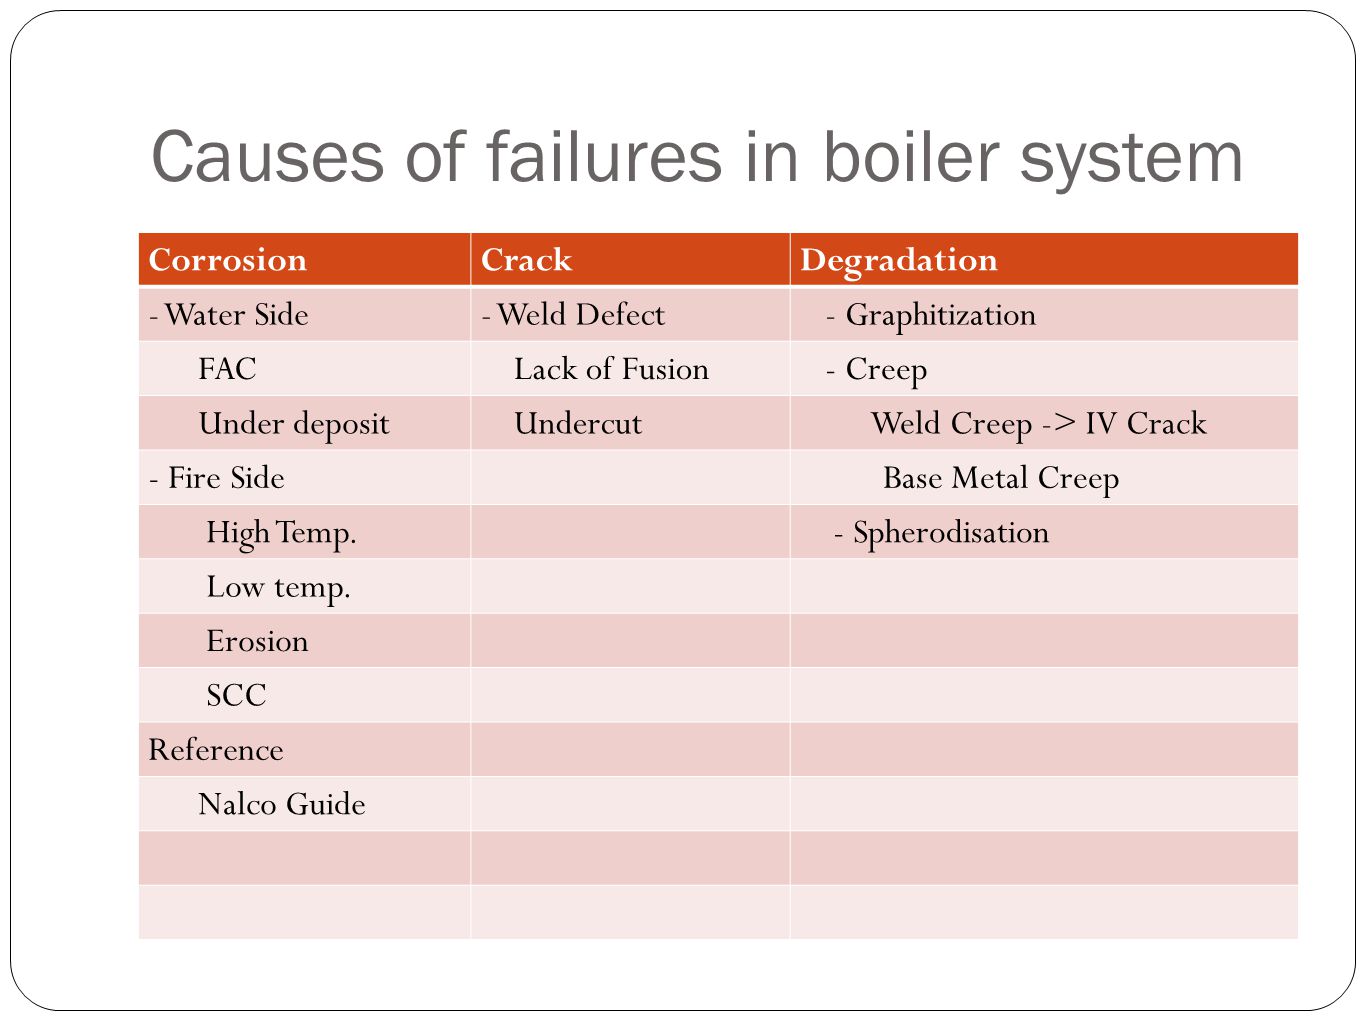 Causes of failures in boiler system